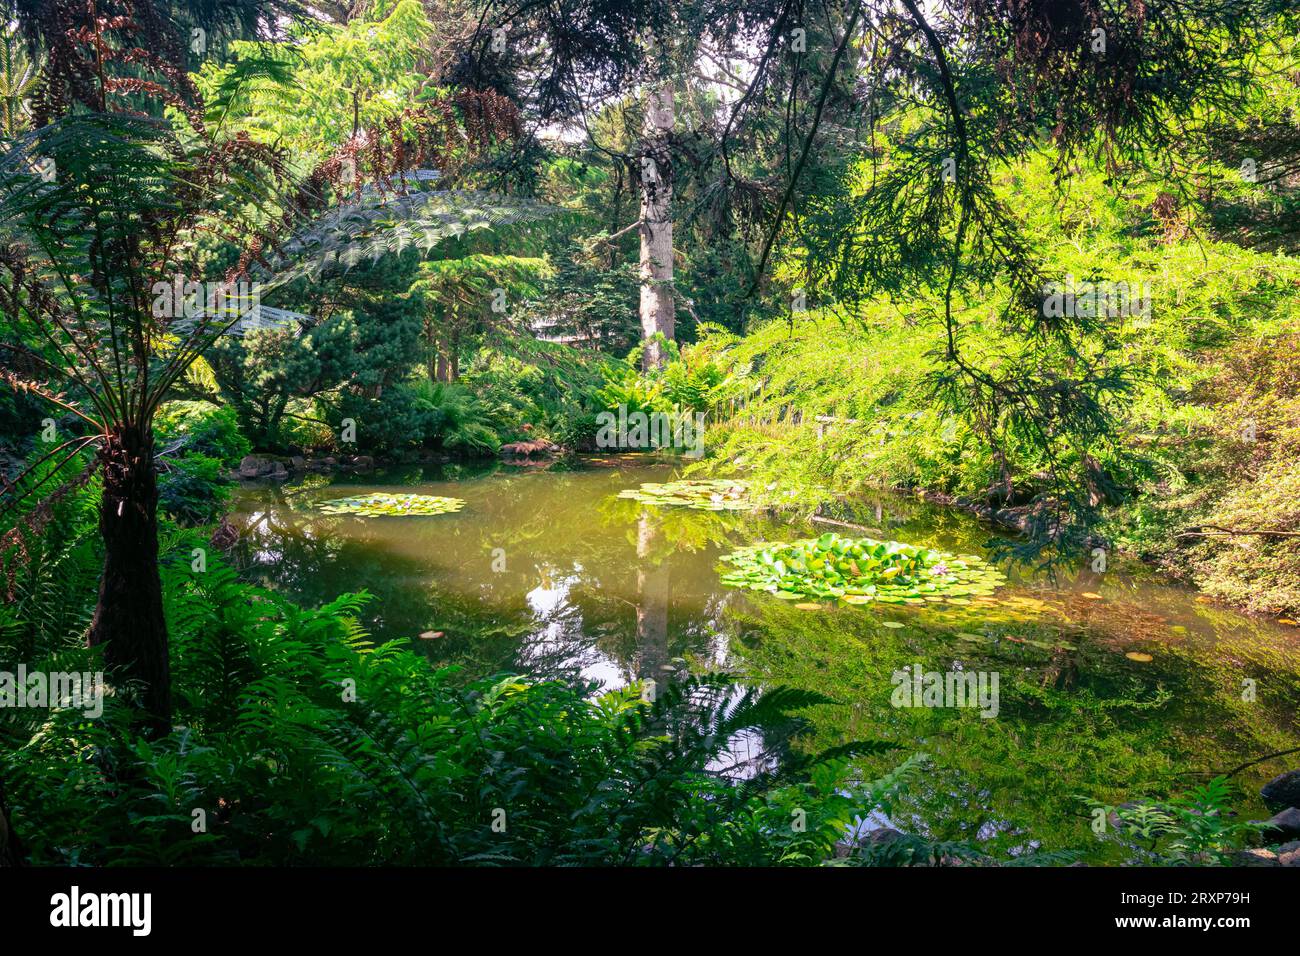 Idyllic view of a pond surrounded by lush vegetation Stock Photo